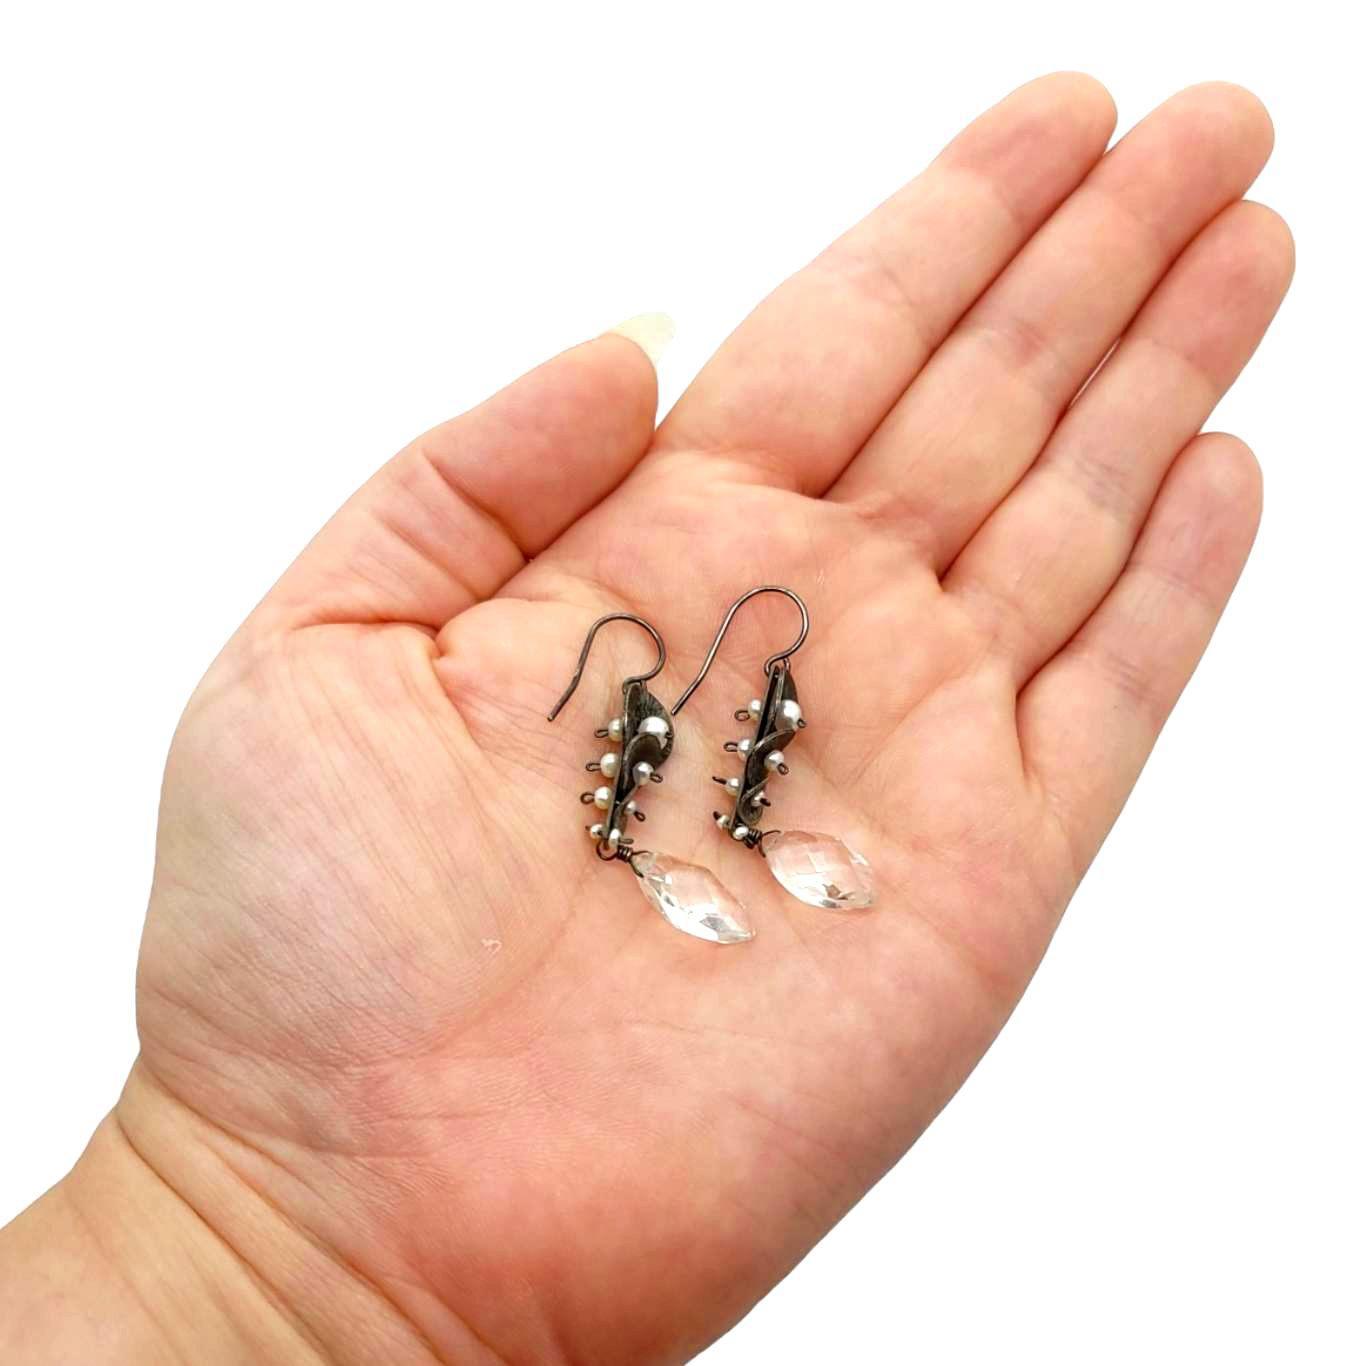 Earrings - Pearl and Silver Chip Bar with Quartz Drop by Calliope Jewelry